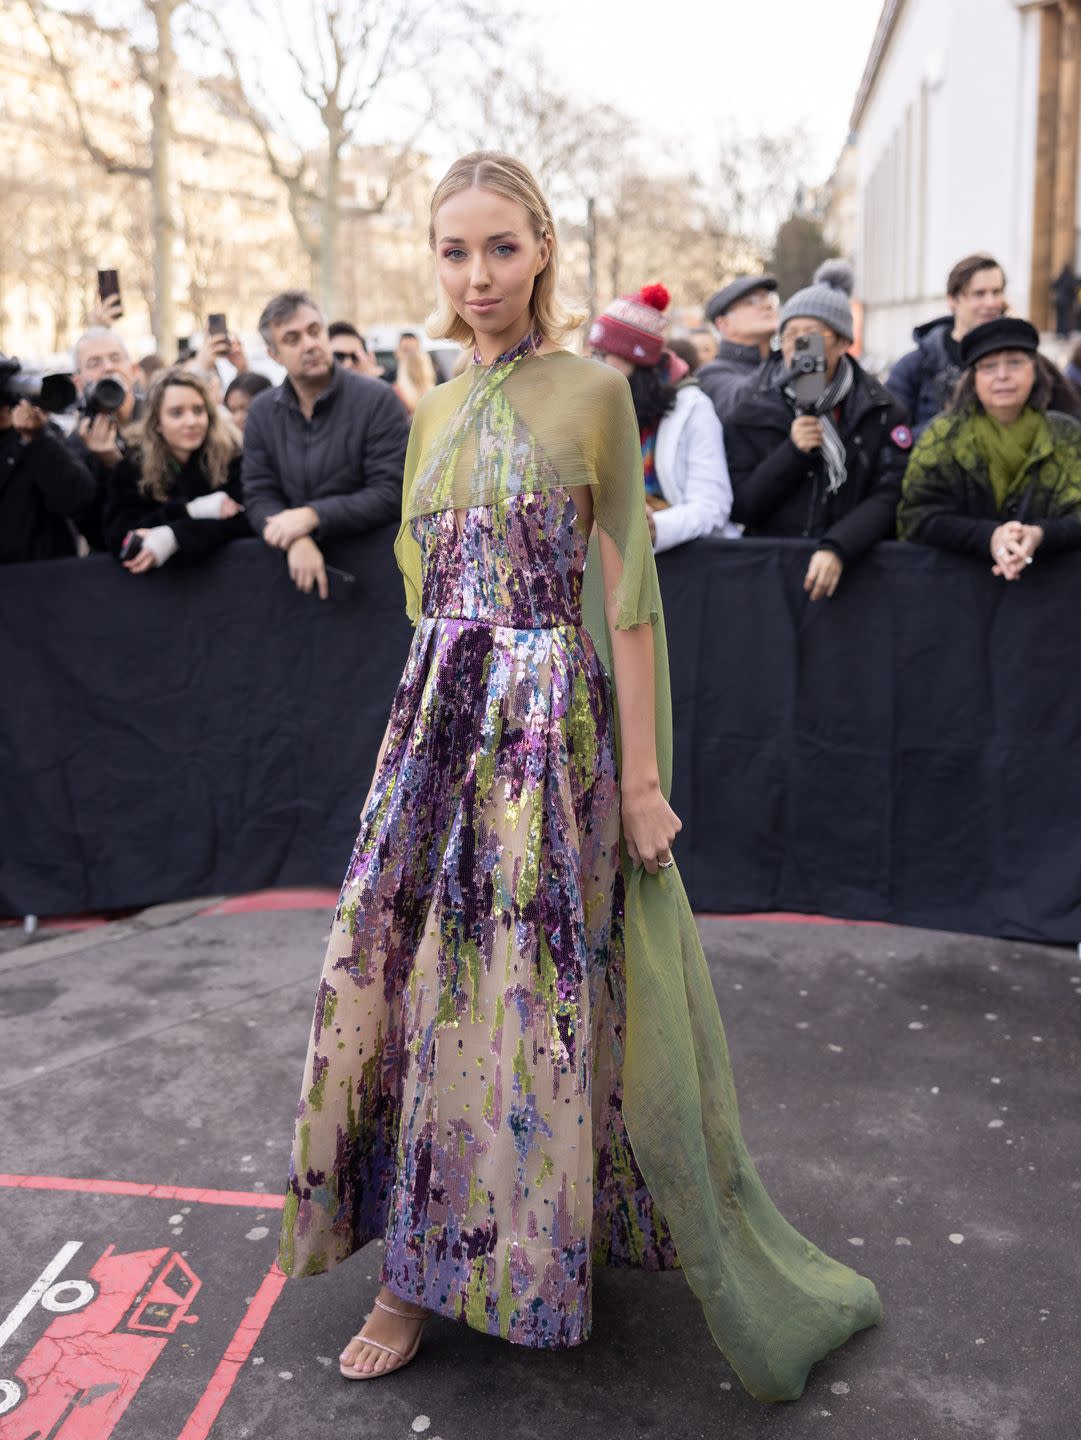 paris, france january 24 princess maria chiara of bourbon two sicilies attends the elie saab haute couture springsummer 2024 show as part of paris fashion week on january 24, 2024 in paris, france photo by arnold jerockigetty images